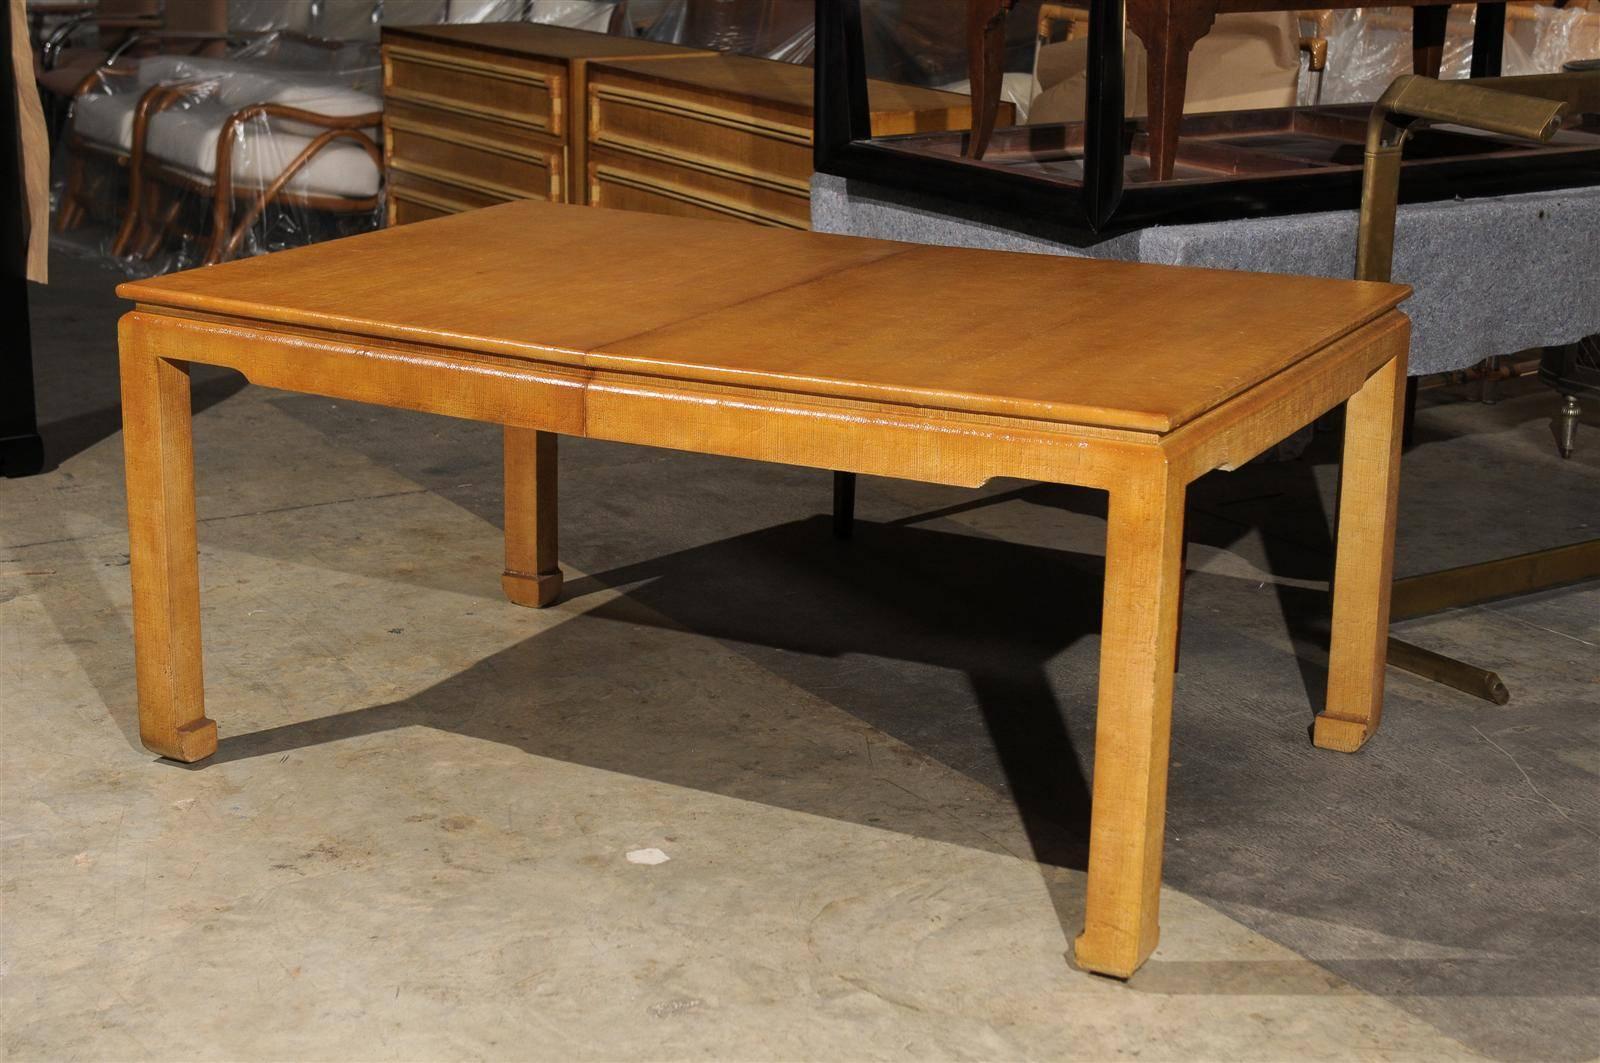 A stunning extension dining table, circa 1975. Expertly crafted hardwood construction veneered in a textured raffia, beautifully aged to perfection. Total elegance! The table is 64